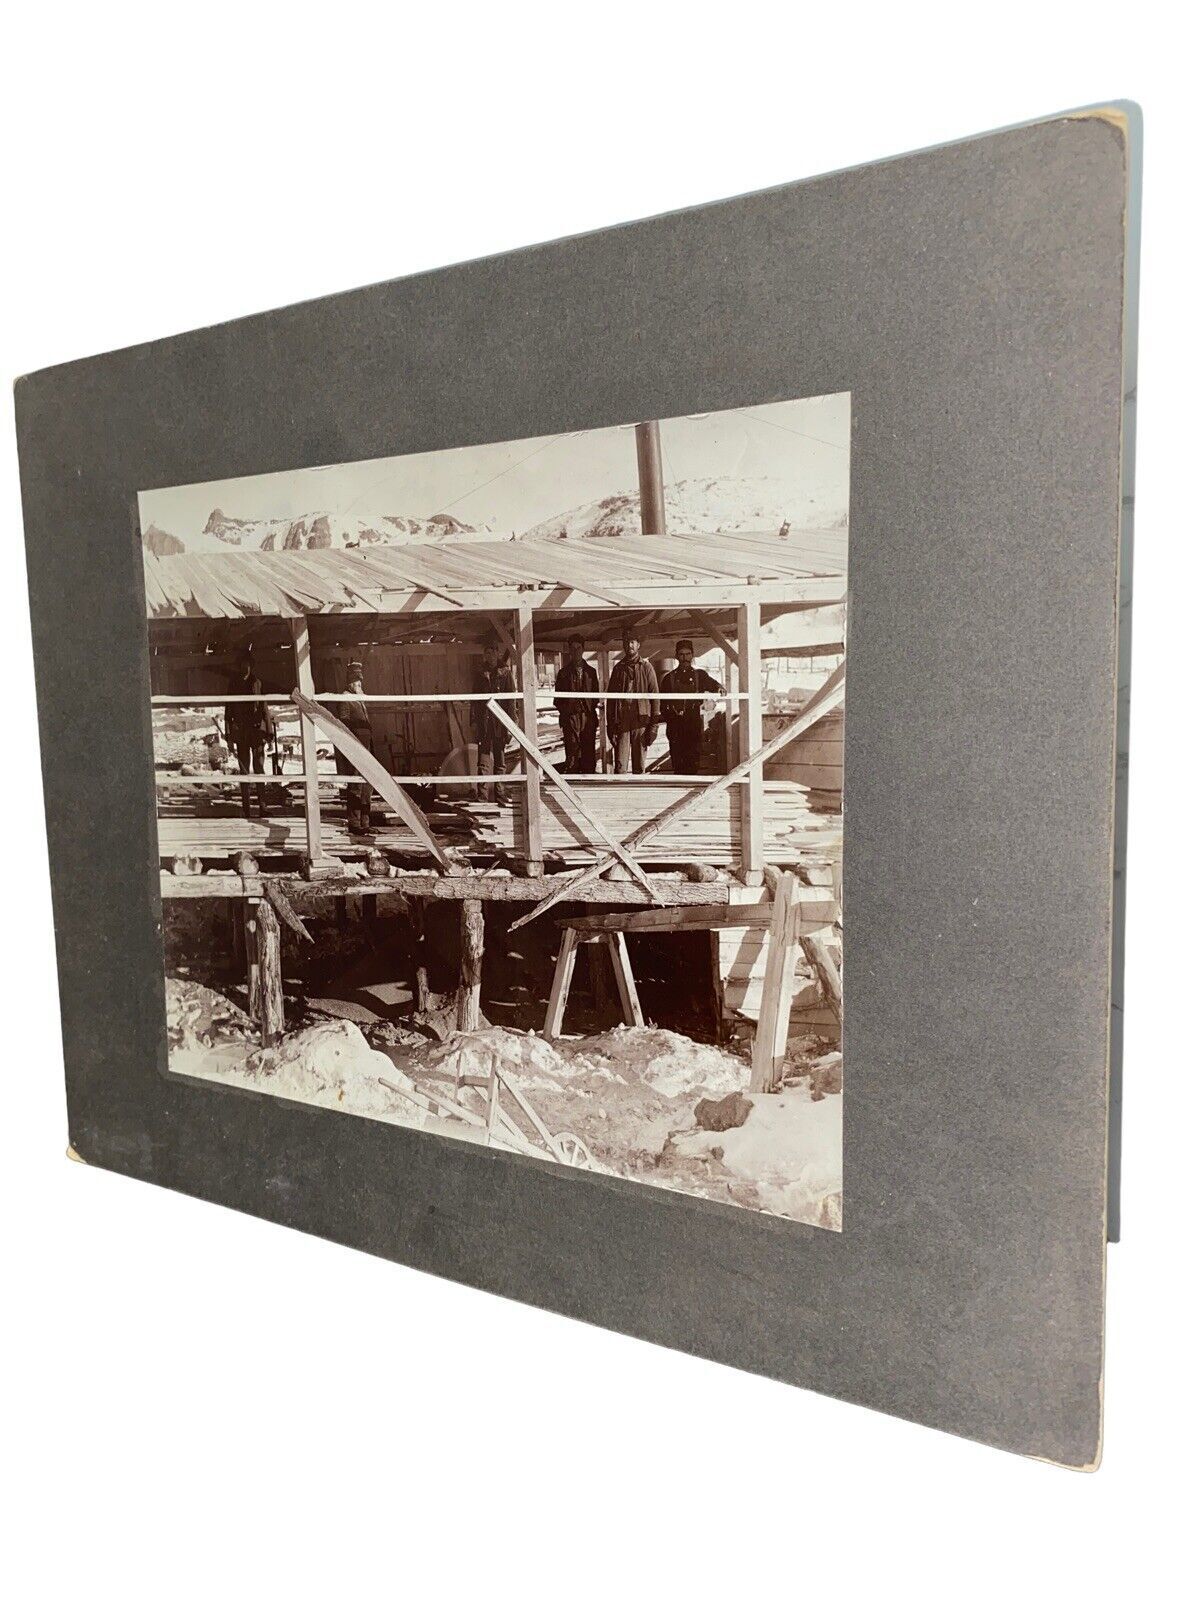 Early logging yard photograph with lumber and workers